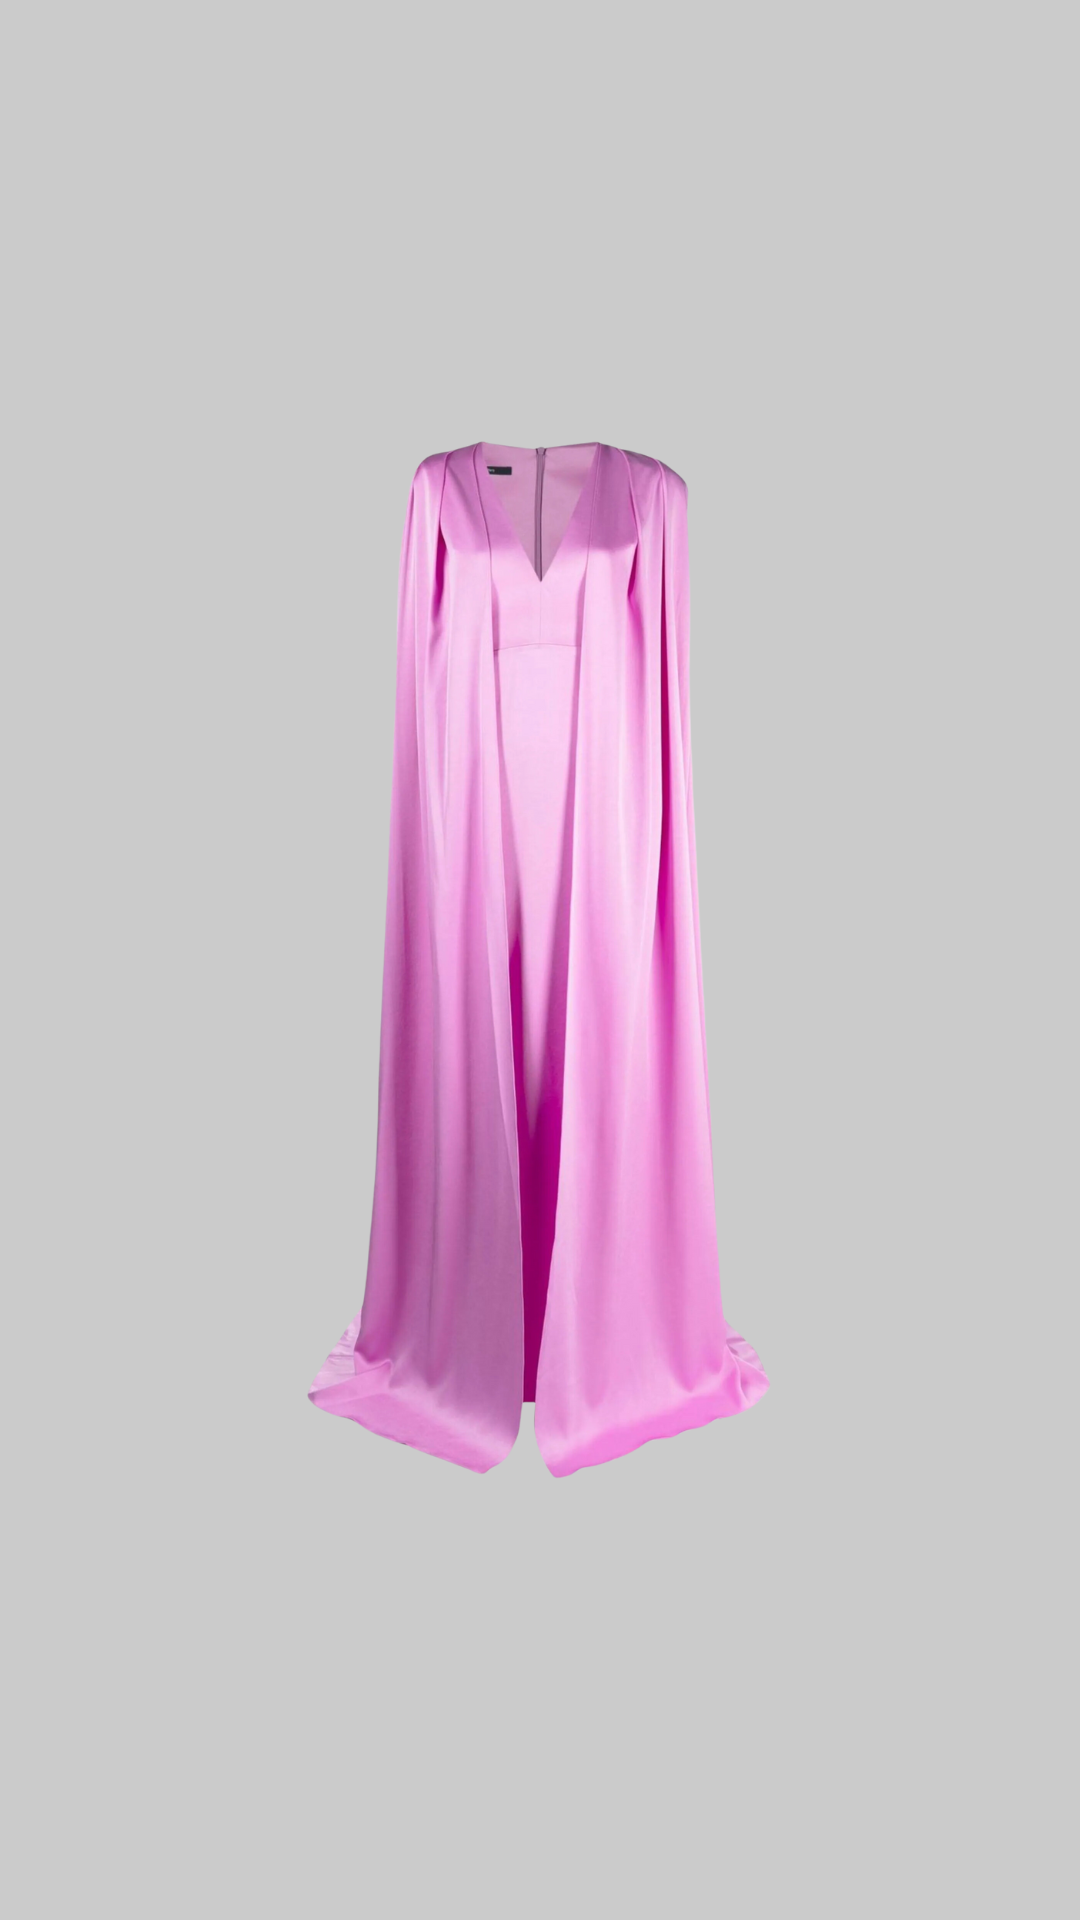 Alex Perry V-Neck Cape Gown